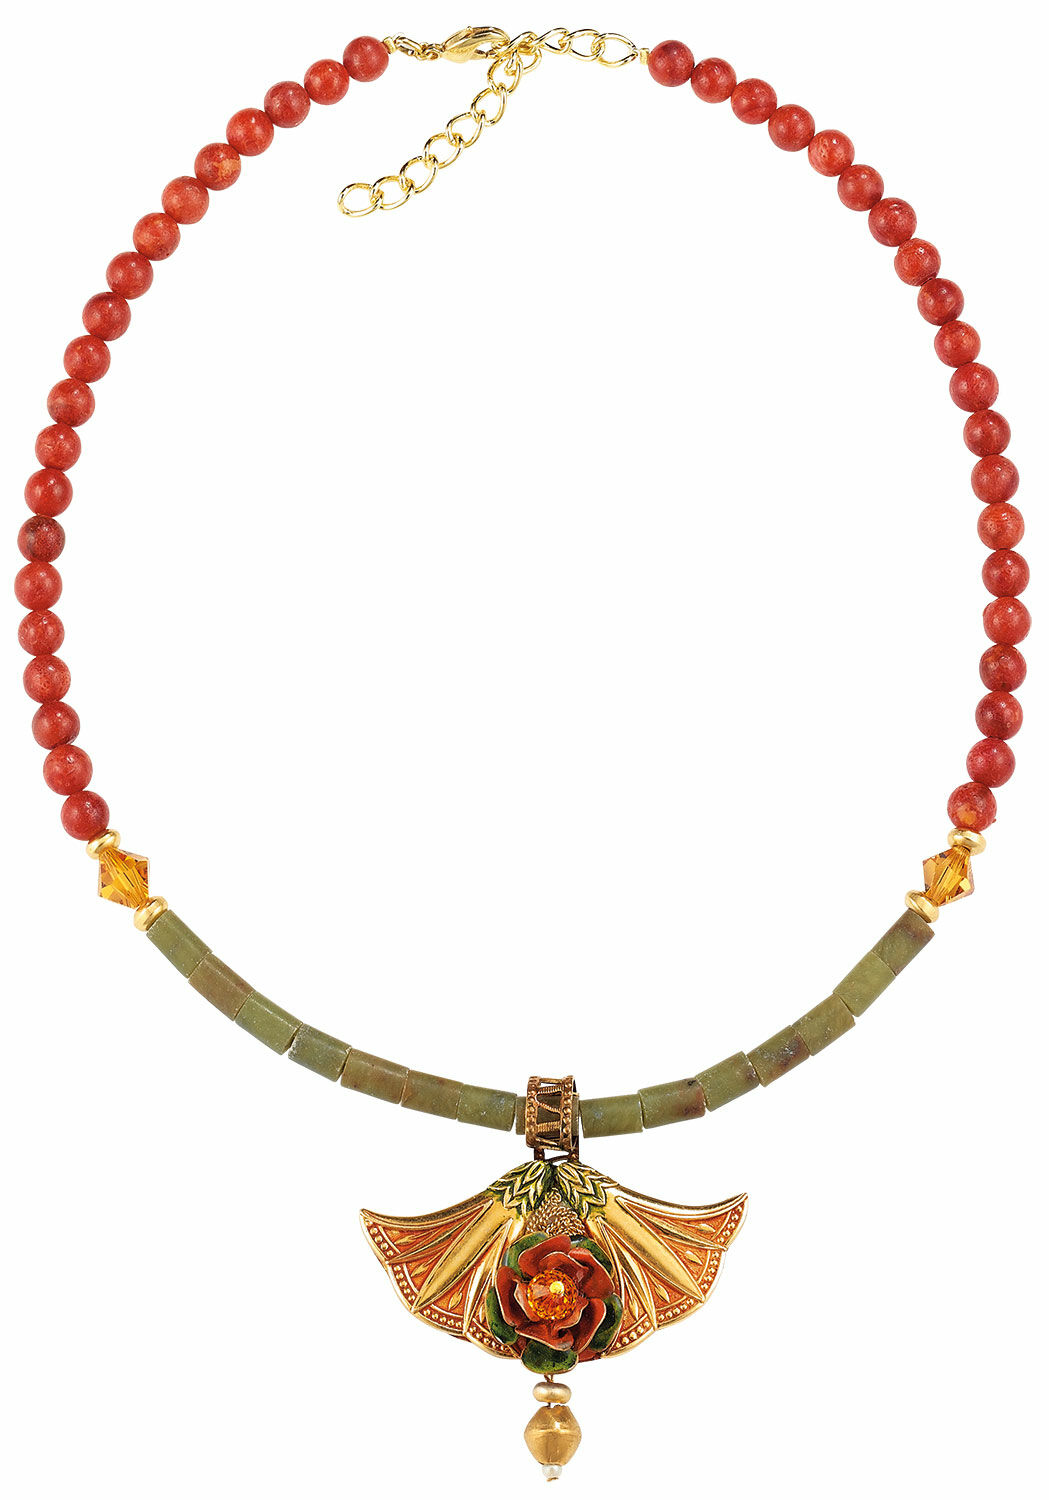 Necklace "The Rose Bush" with serpentine and coral chain - after Monet by Petra Waszak